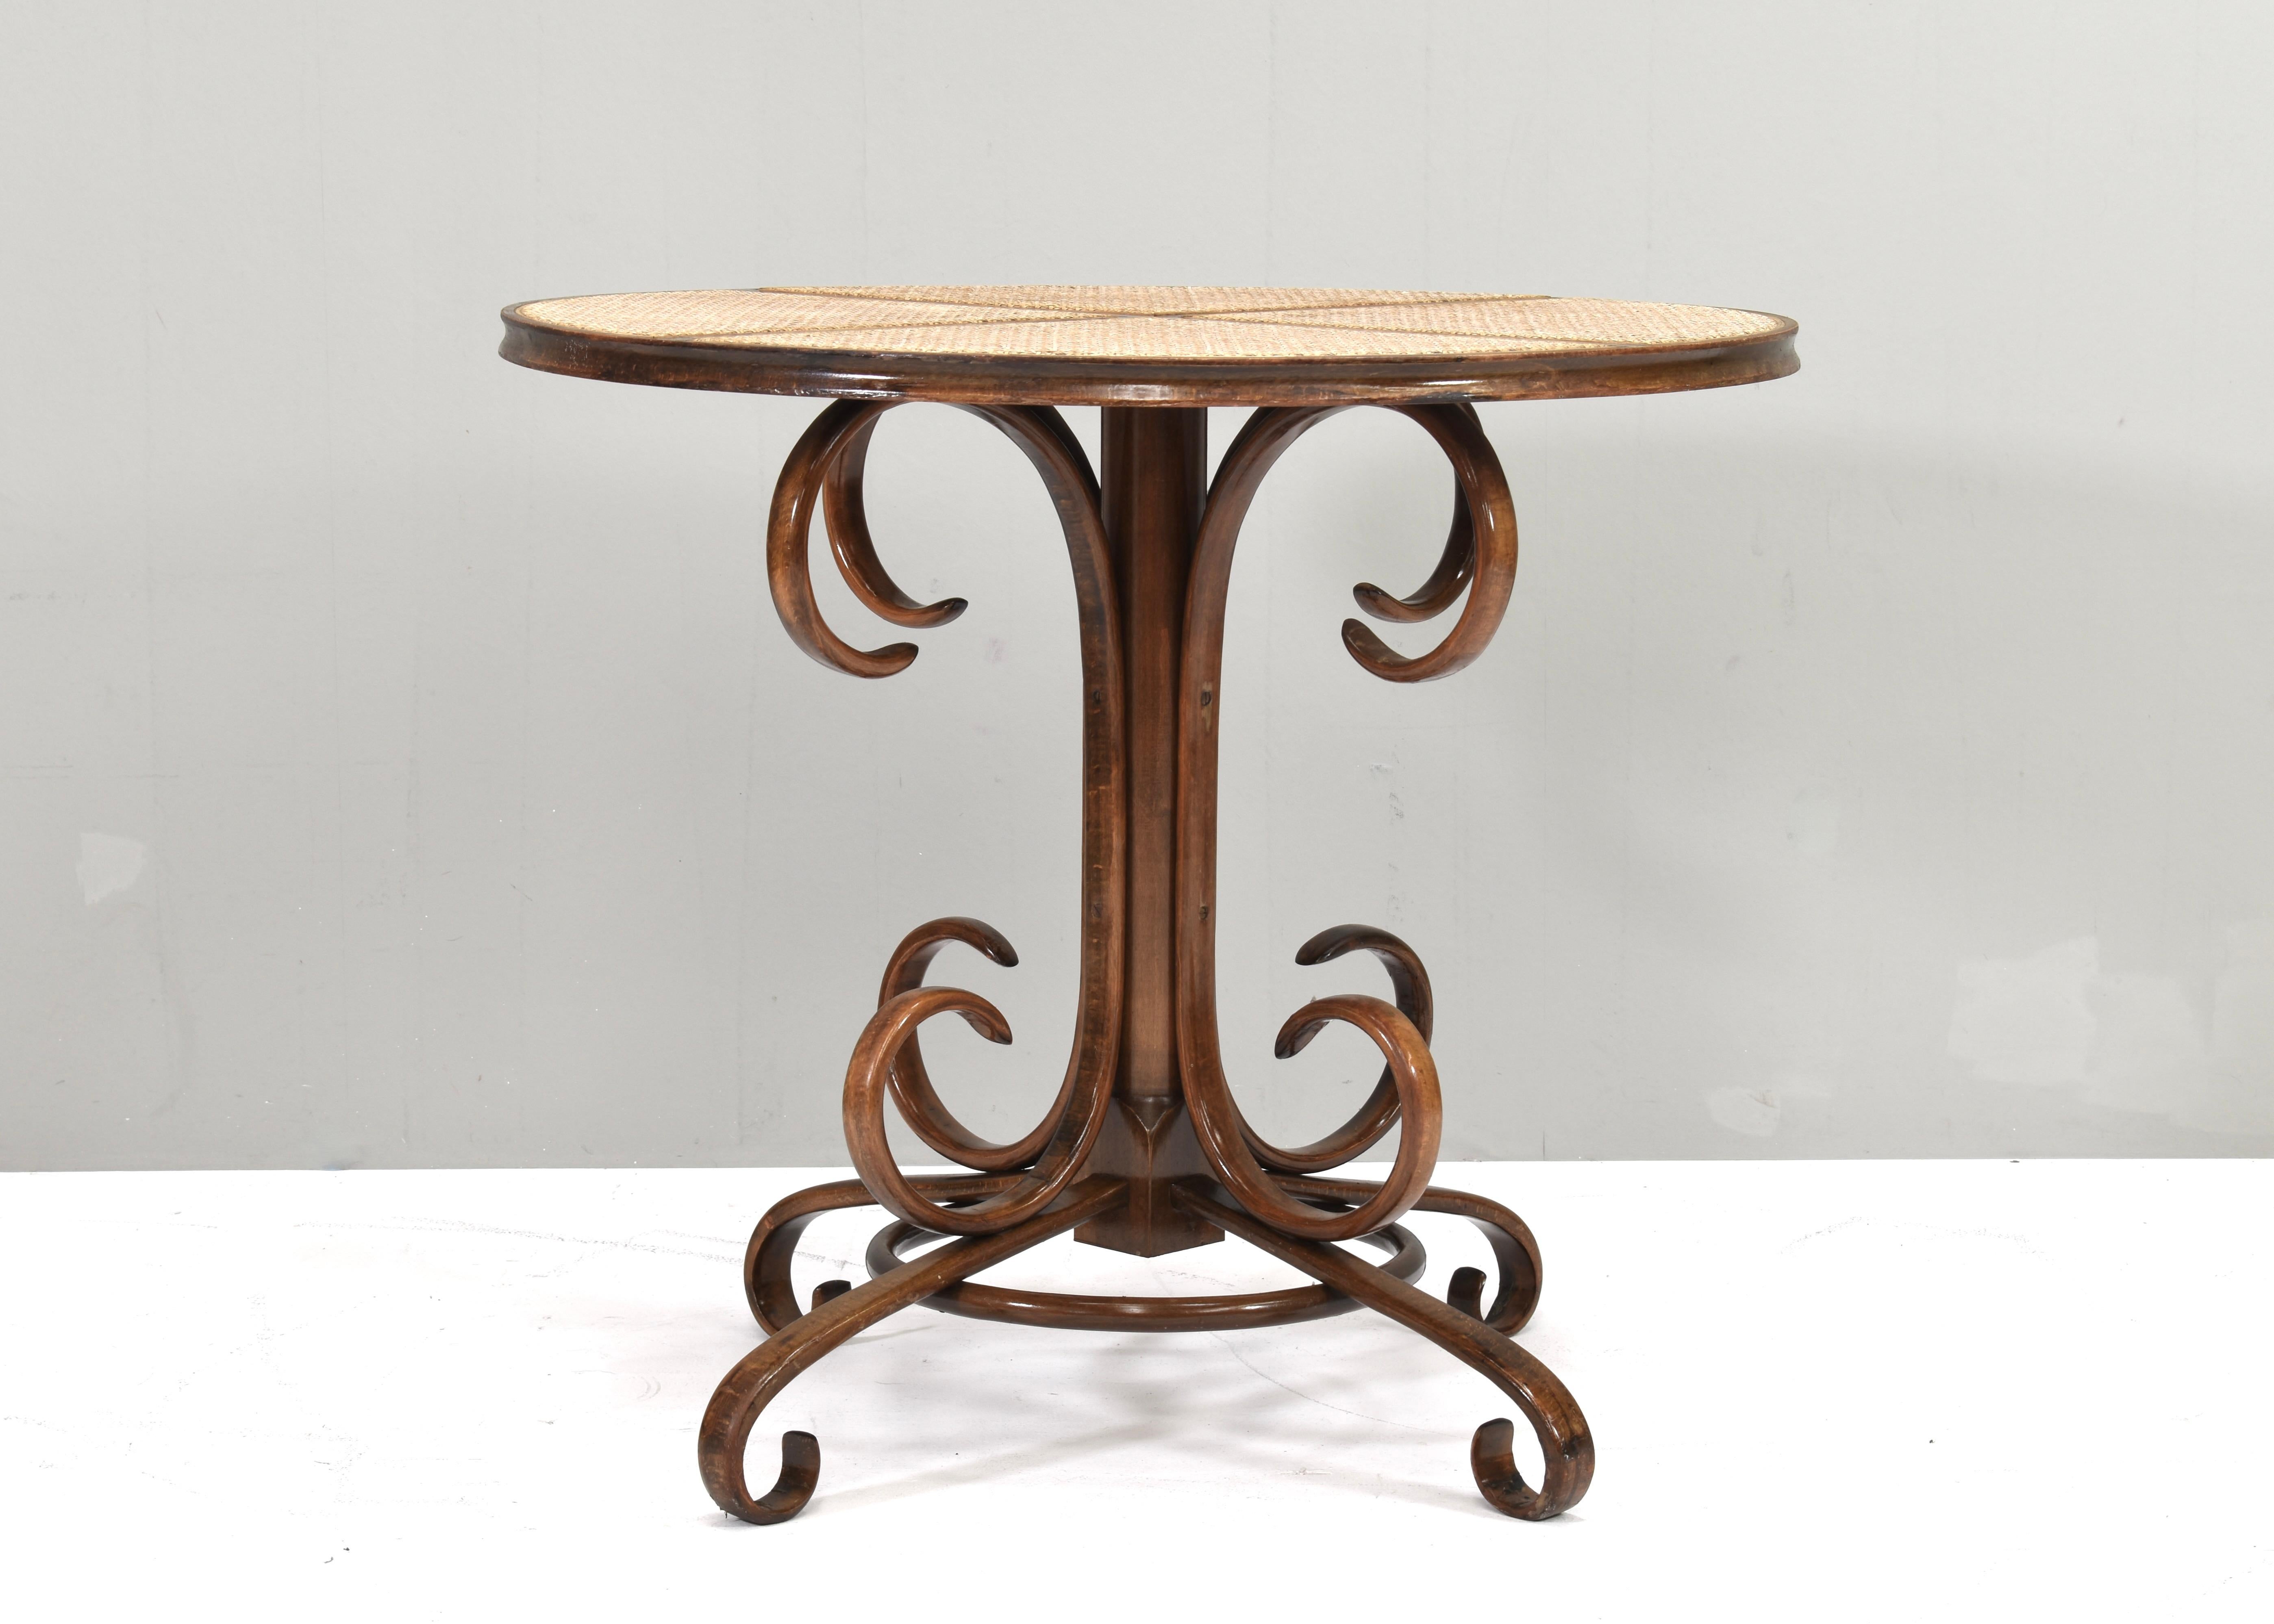 Rococo Revival Early Michael Thonet Bistro Dining Table in Bentwood and Cane - Austria For Sale